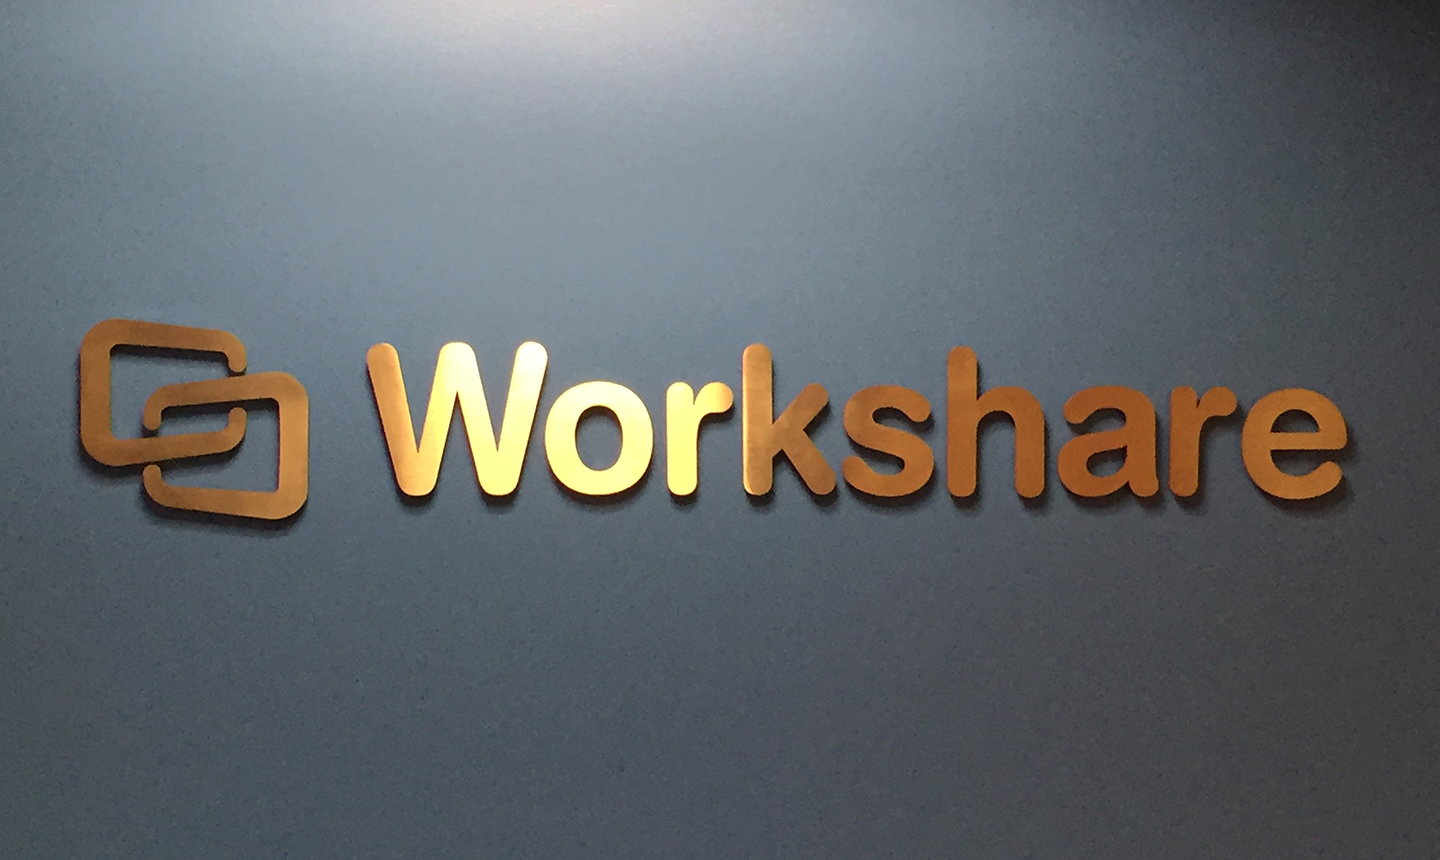 Workshare 3-Dimensional Office Entrance Wall Sign